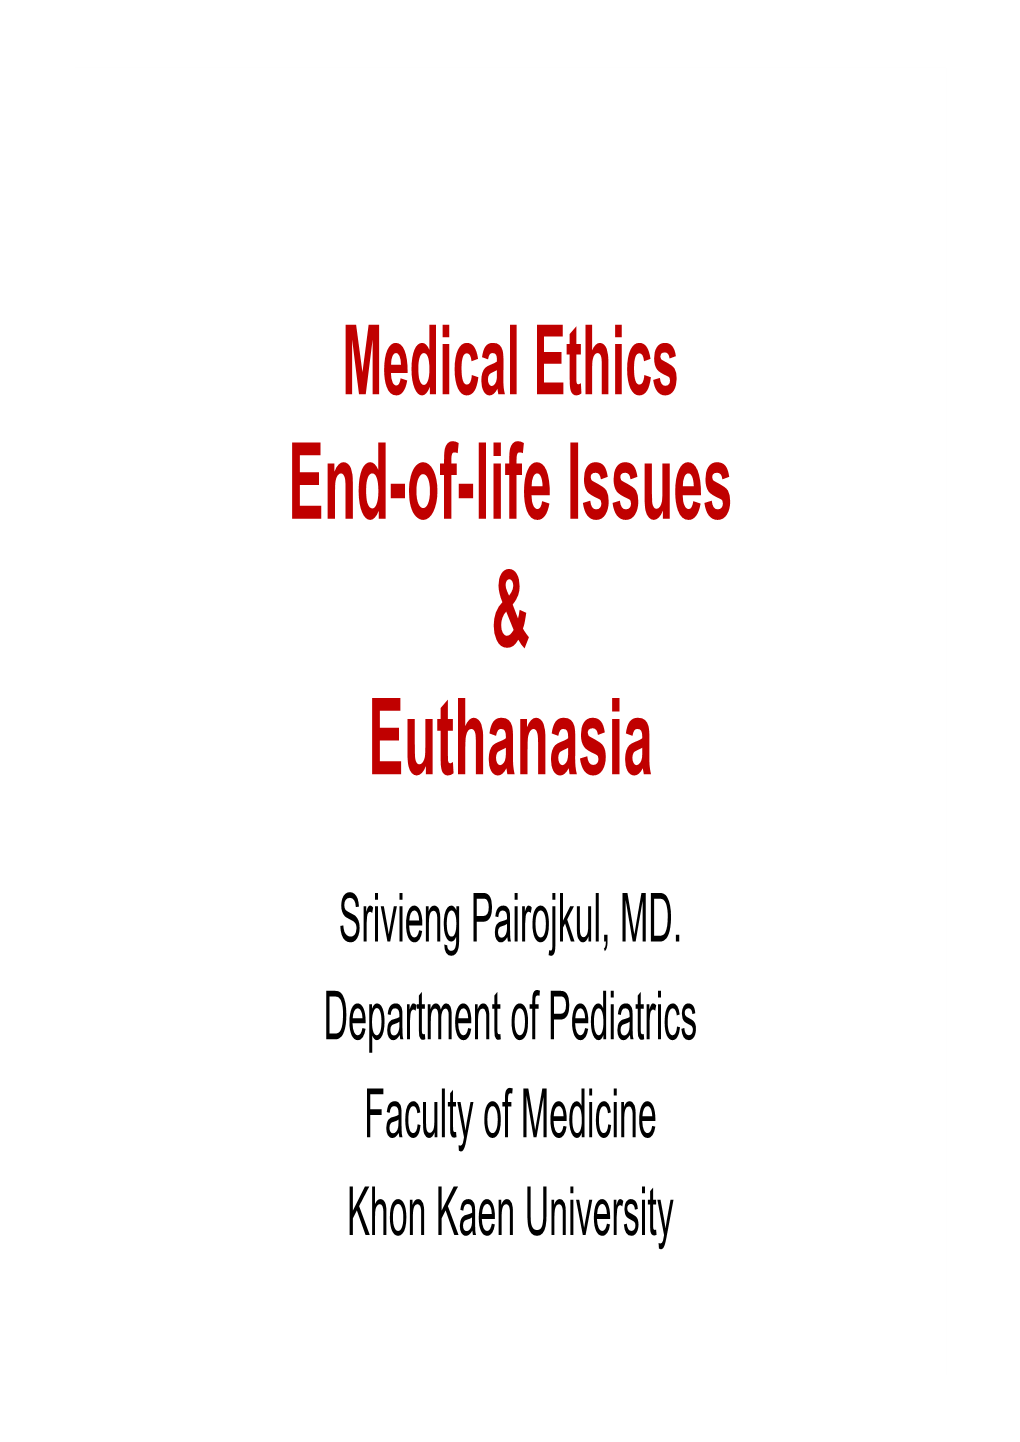 Medical Ethics End-Of-Life Issues & Euthanasia